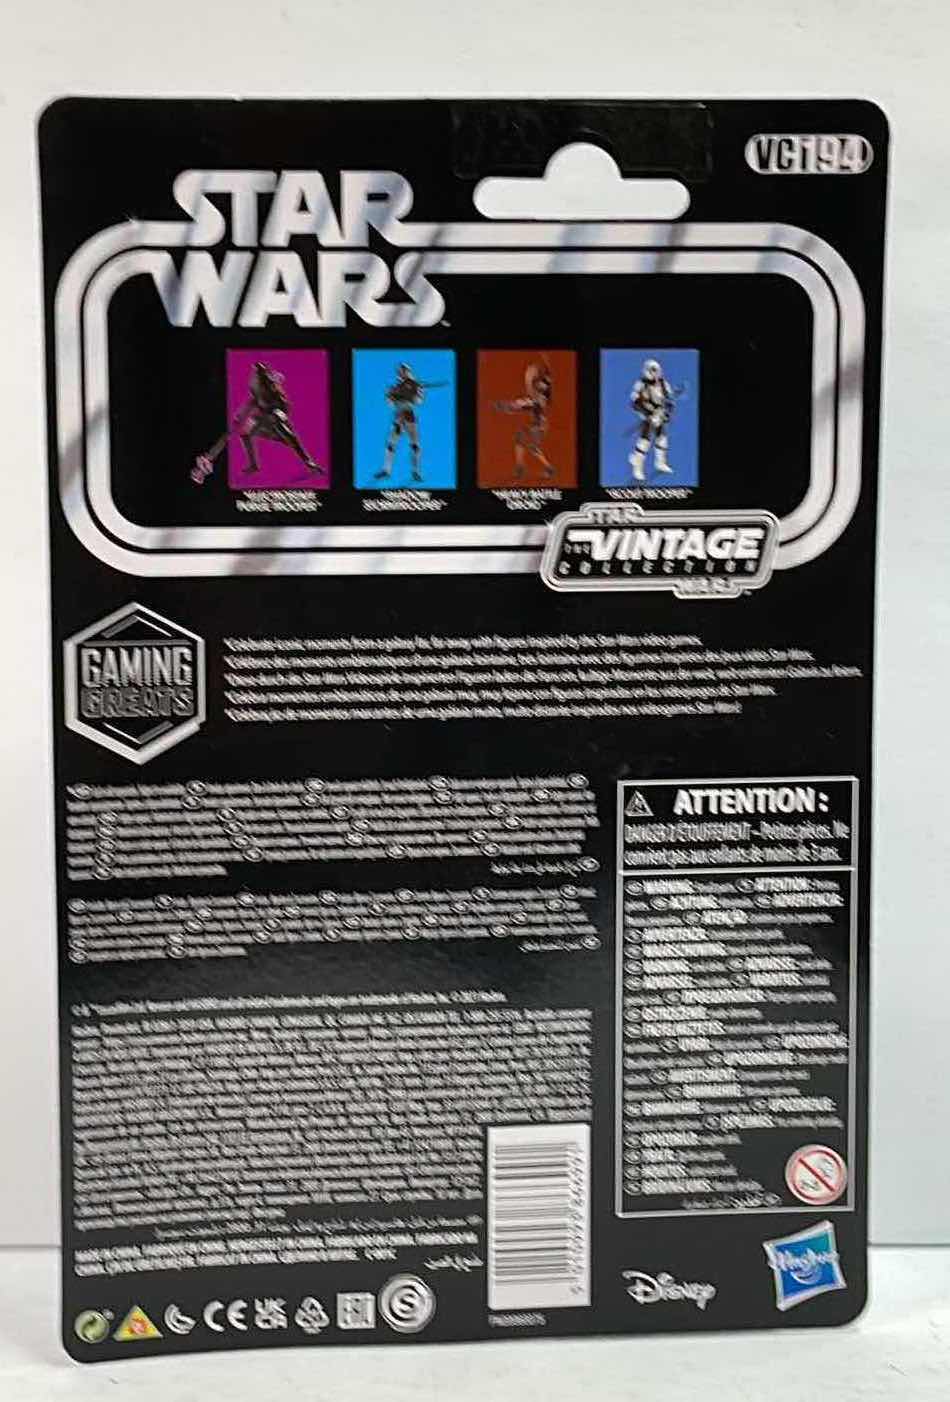 Photo 2 of NIB STAR WARS THE VINTAGE COLLECTION “SHADOW STORMTROOPER” ACTION FIGURE - RETAIL PRICE $14.99